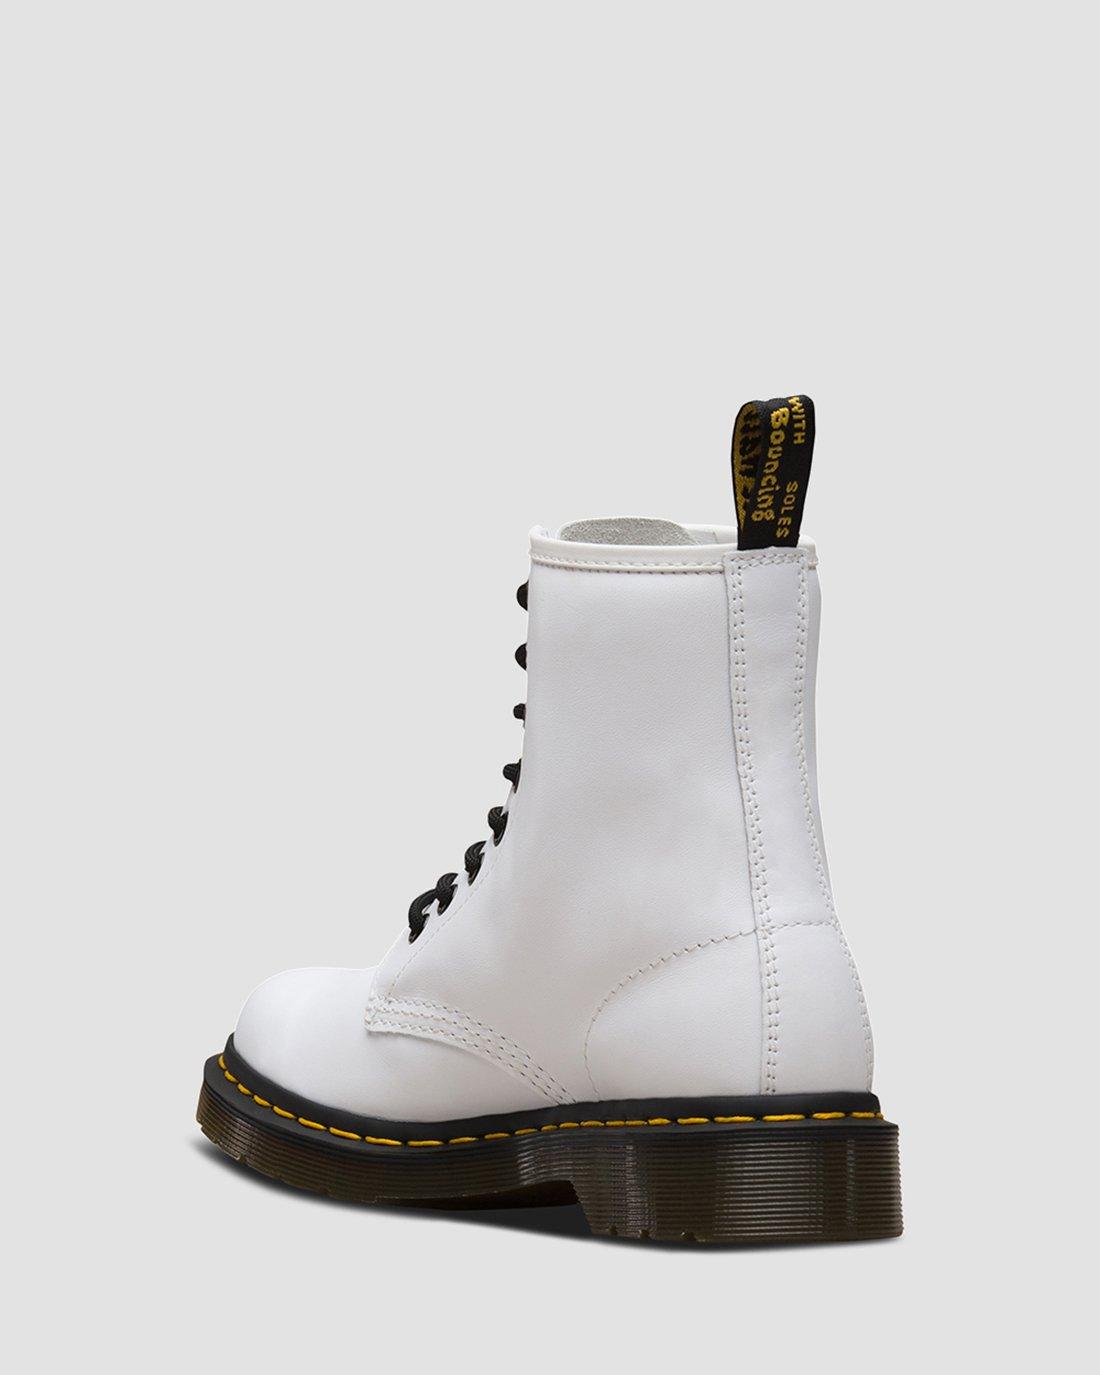  Dr. Martens Women's Lace Fashion Boot, White Softy T, 5